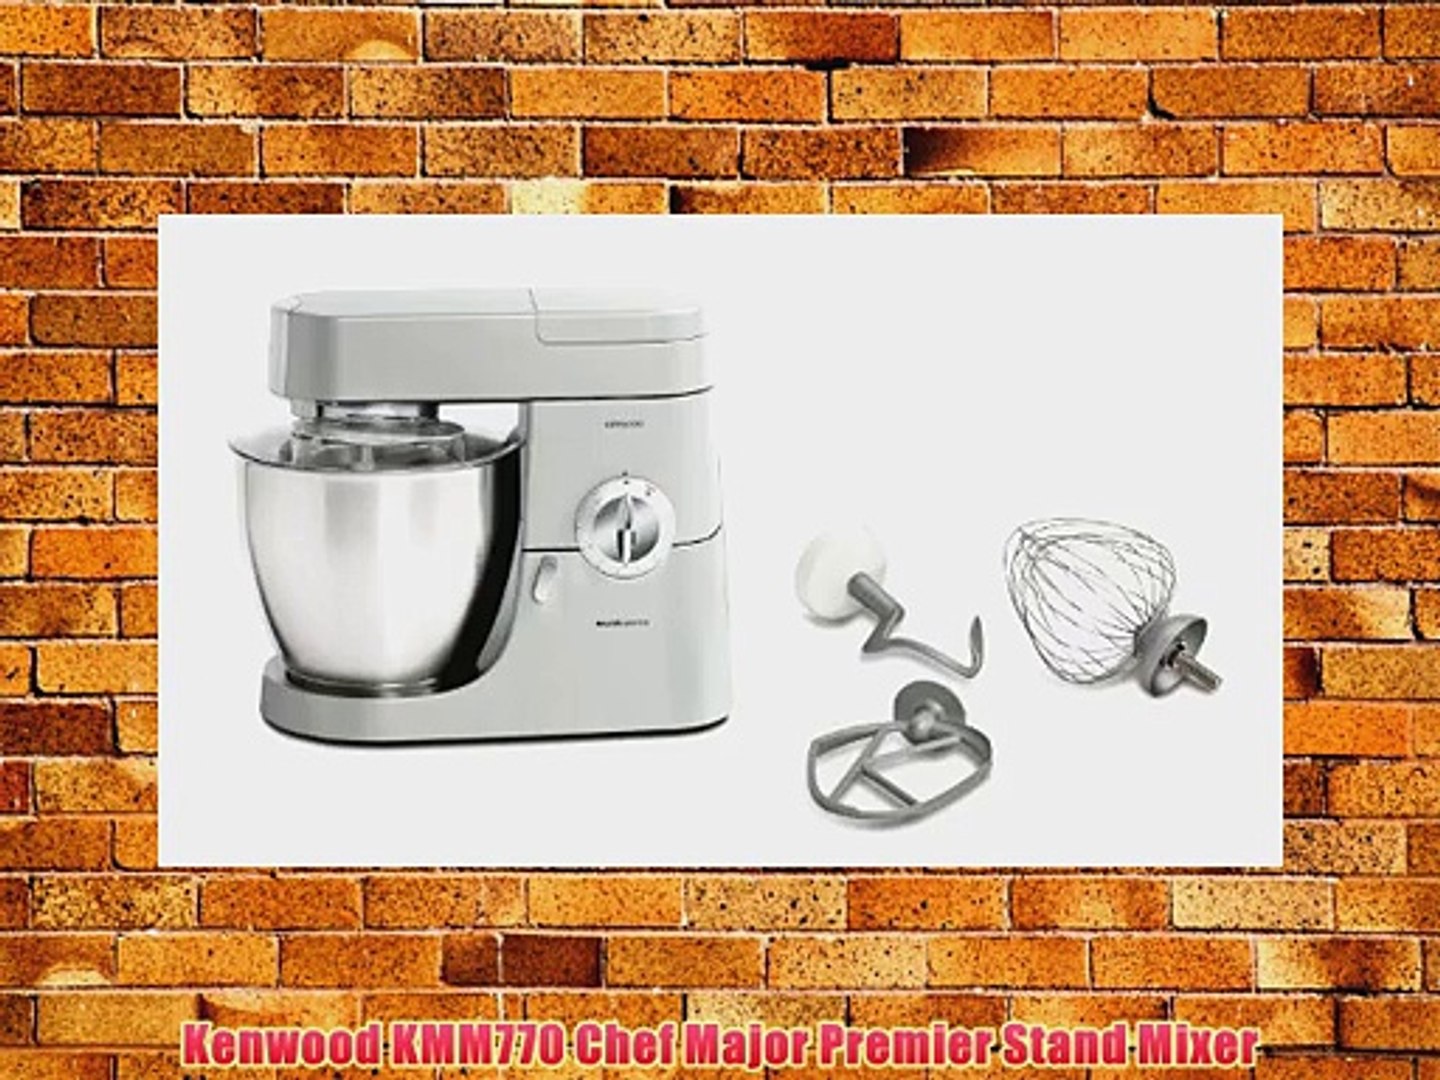 Kenwood KMM770 Chef Major Premier Stand Mixer - video Dailymotion